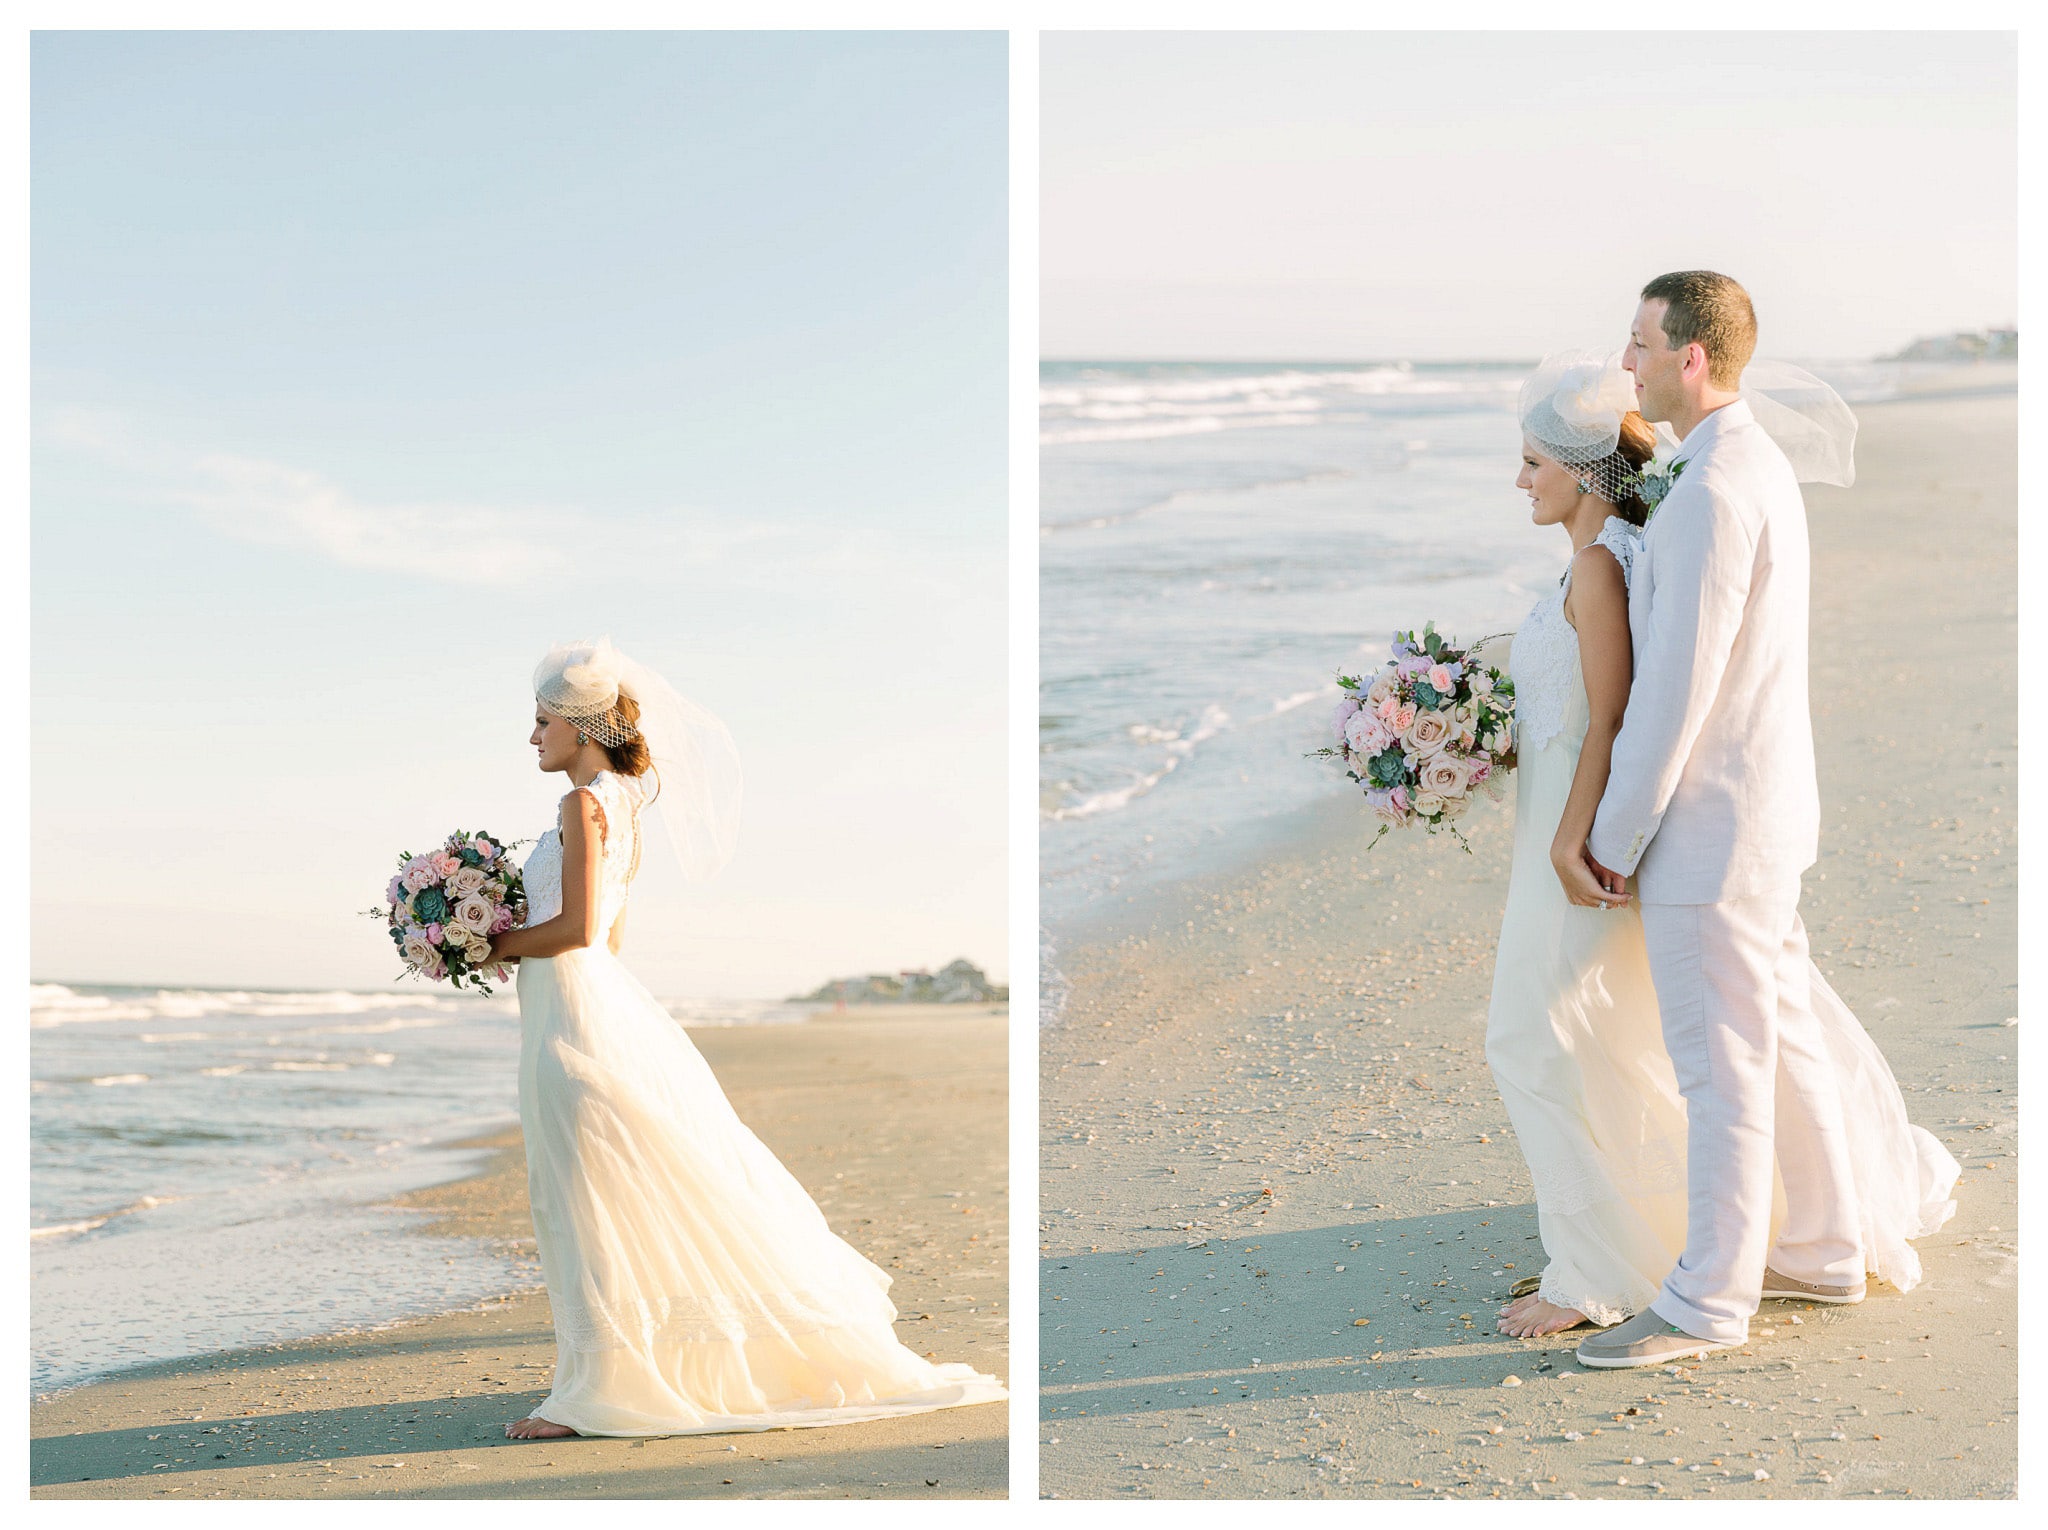 Bride and Groom Looking Forward out over the water - Fine art wedding photography in South Carolina - Venue - Beach House Gulf Stream Breeze, Beach Realty Catering and Cake - Buttercream Cakes and Catering, LLC Flowers - Callas Florist Event Rentals - Event Works DJ - Scott Shaw